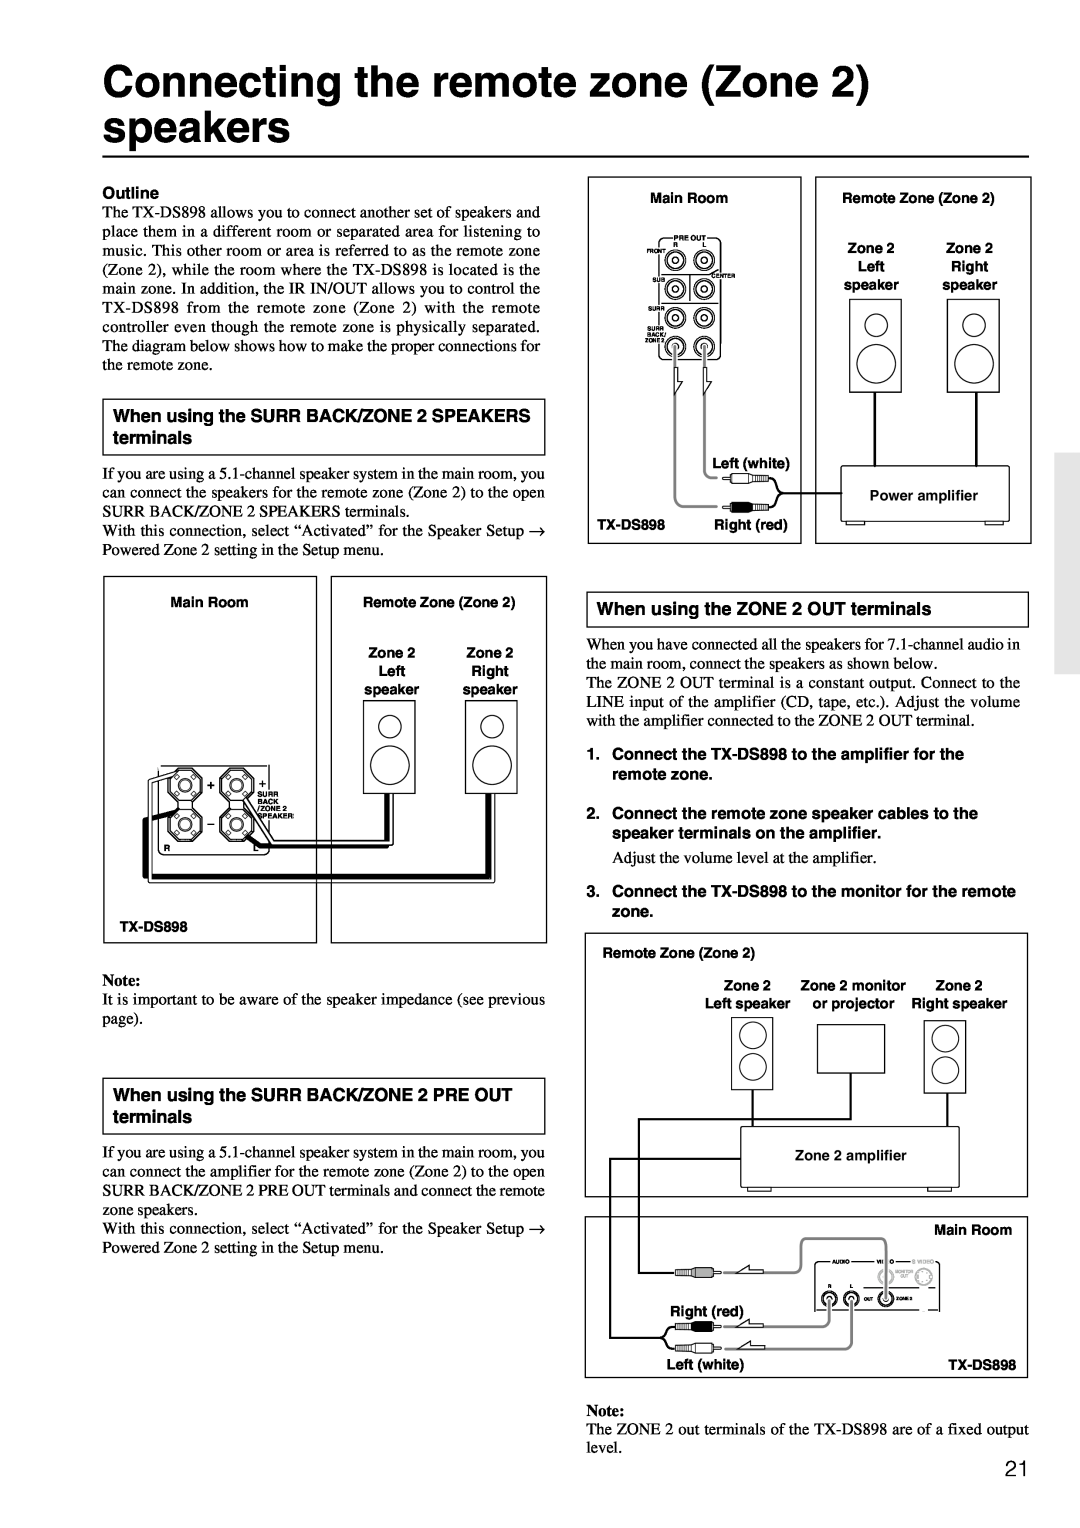 Onkyo TX-DS898 instruction manual Connecting the remote zone Zone 2 speakers, When using the ZONE 2 OUT terminals 